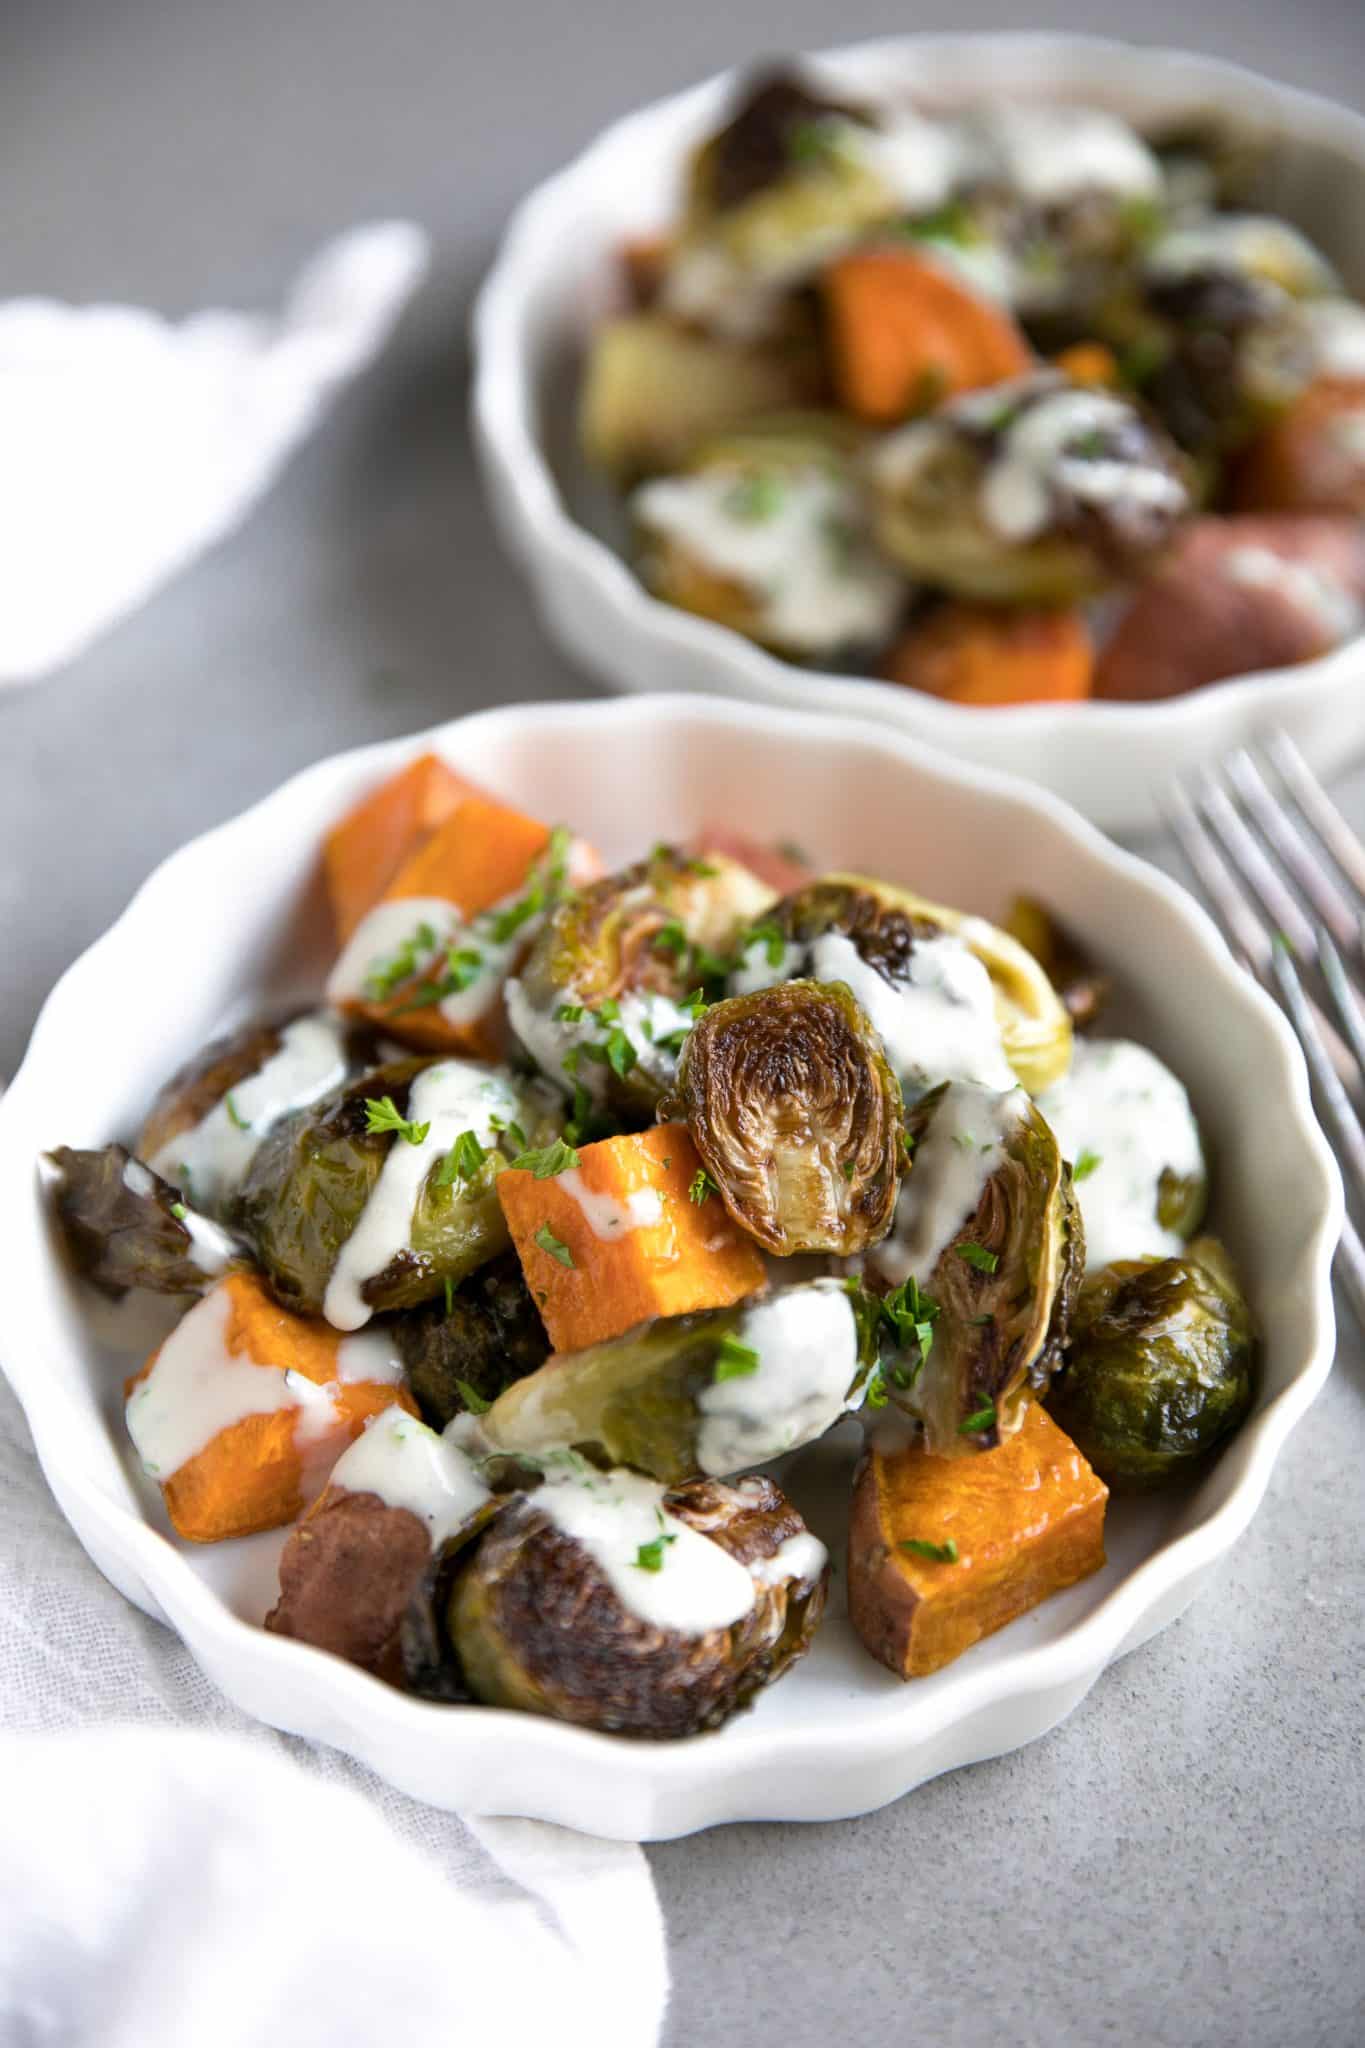 Small white plates filled with individual servings of oven-roasted Brussels sprouts and sweet potato cubes drizzled with tahini and chopped parsley.